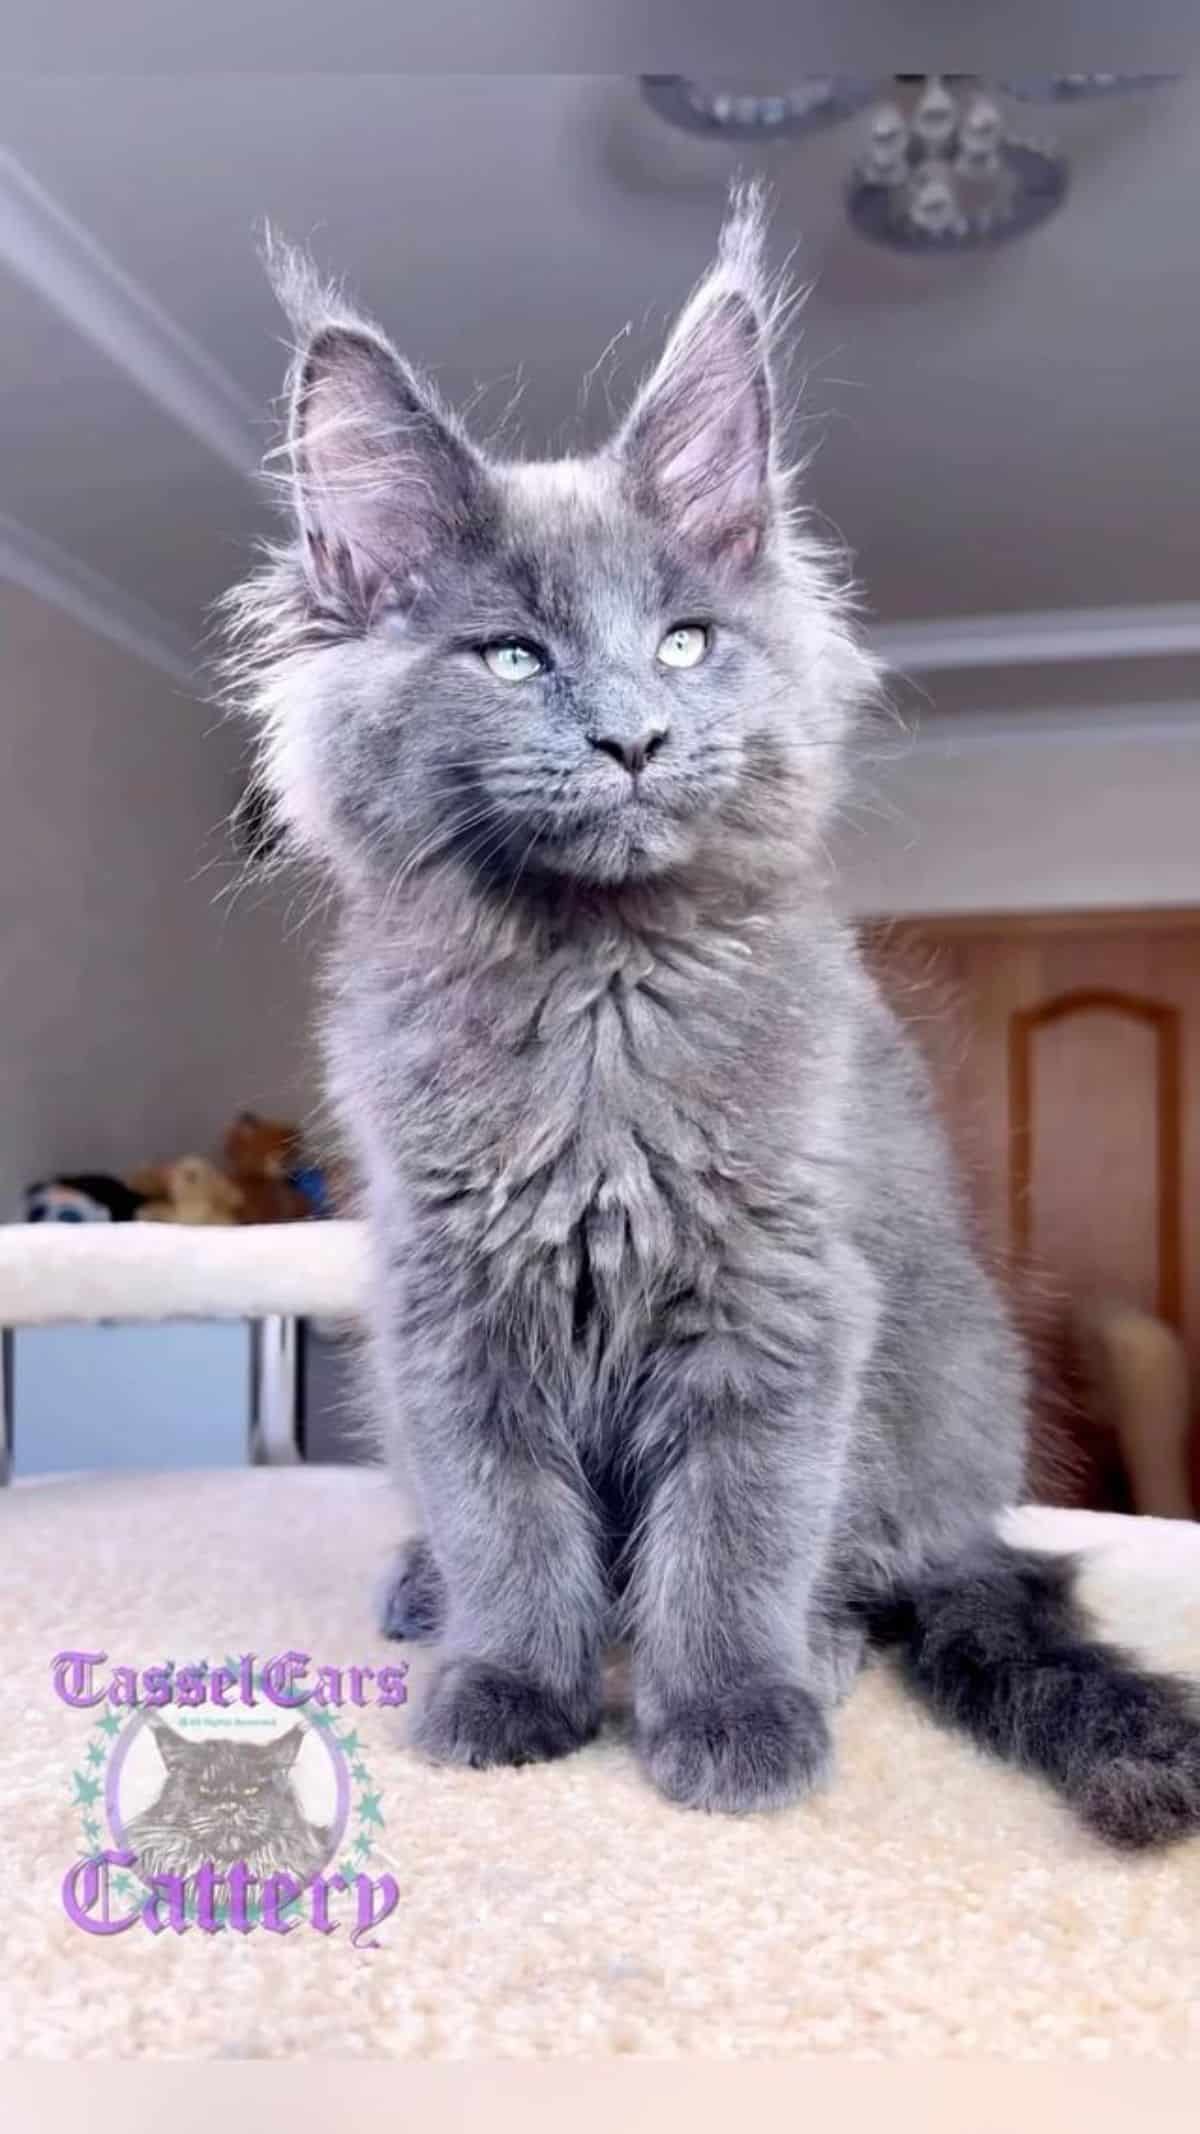 A fluffy gray maine coon kitten sitting on a cat tree.